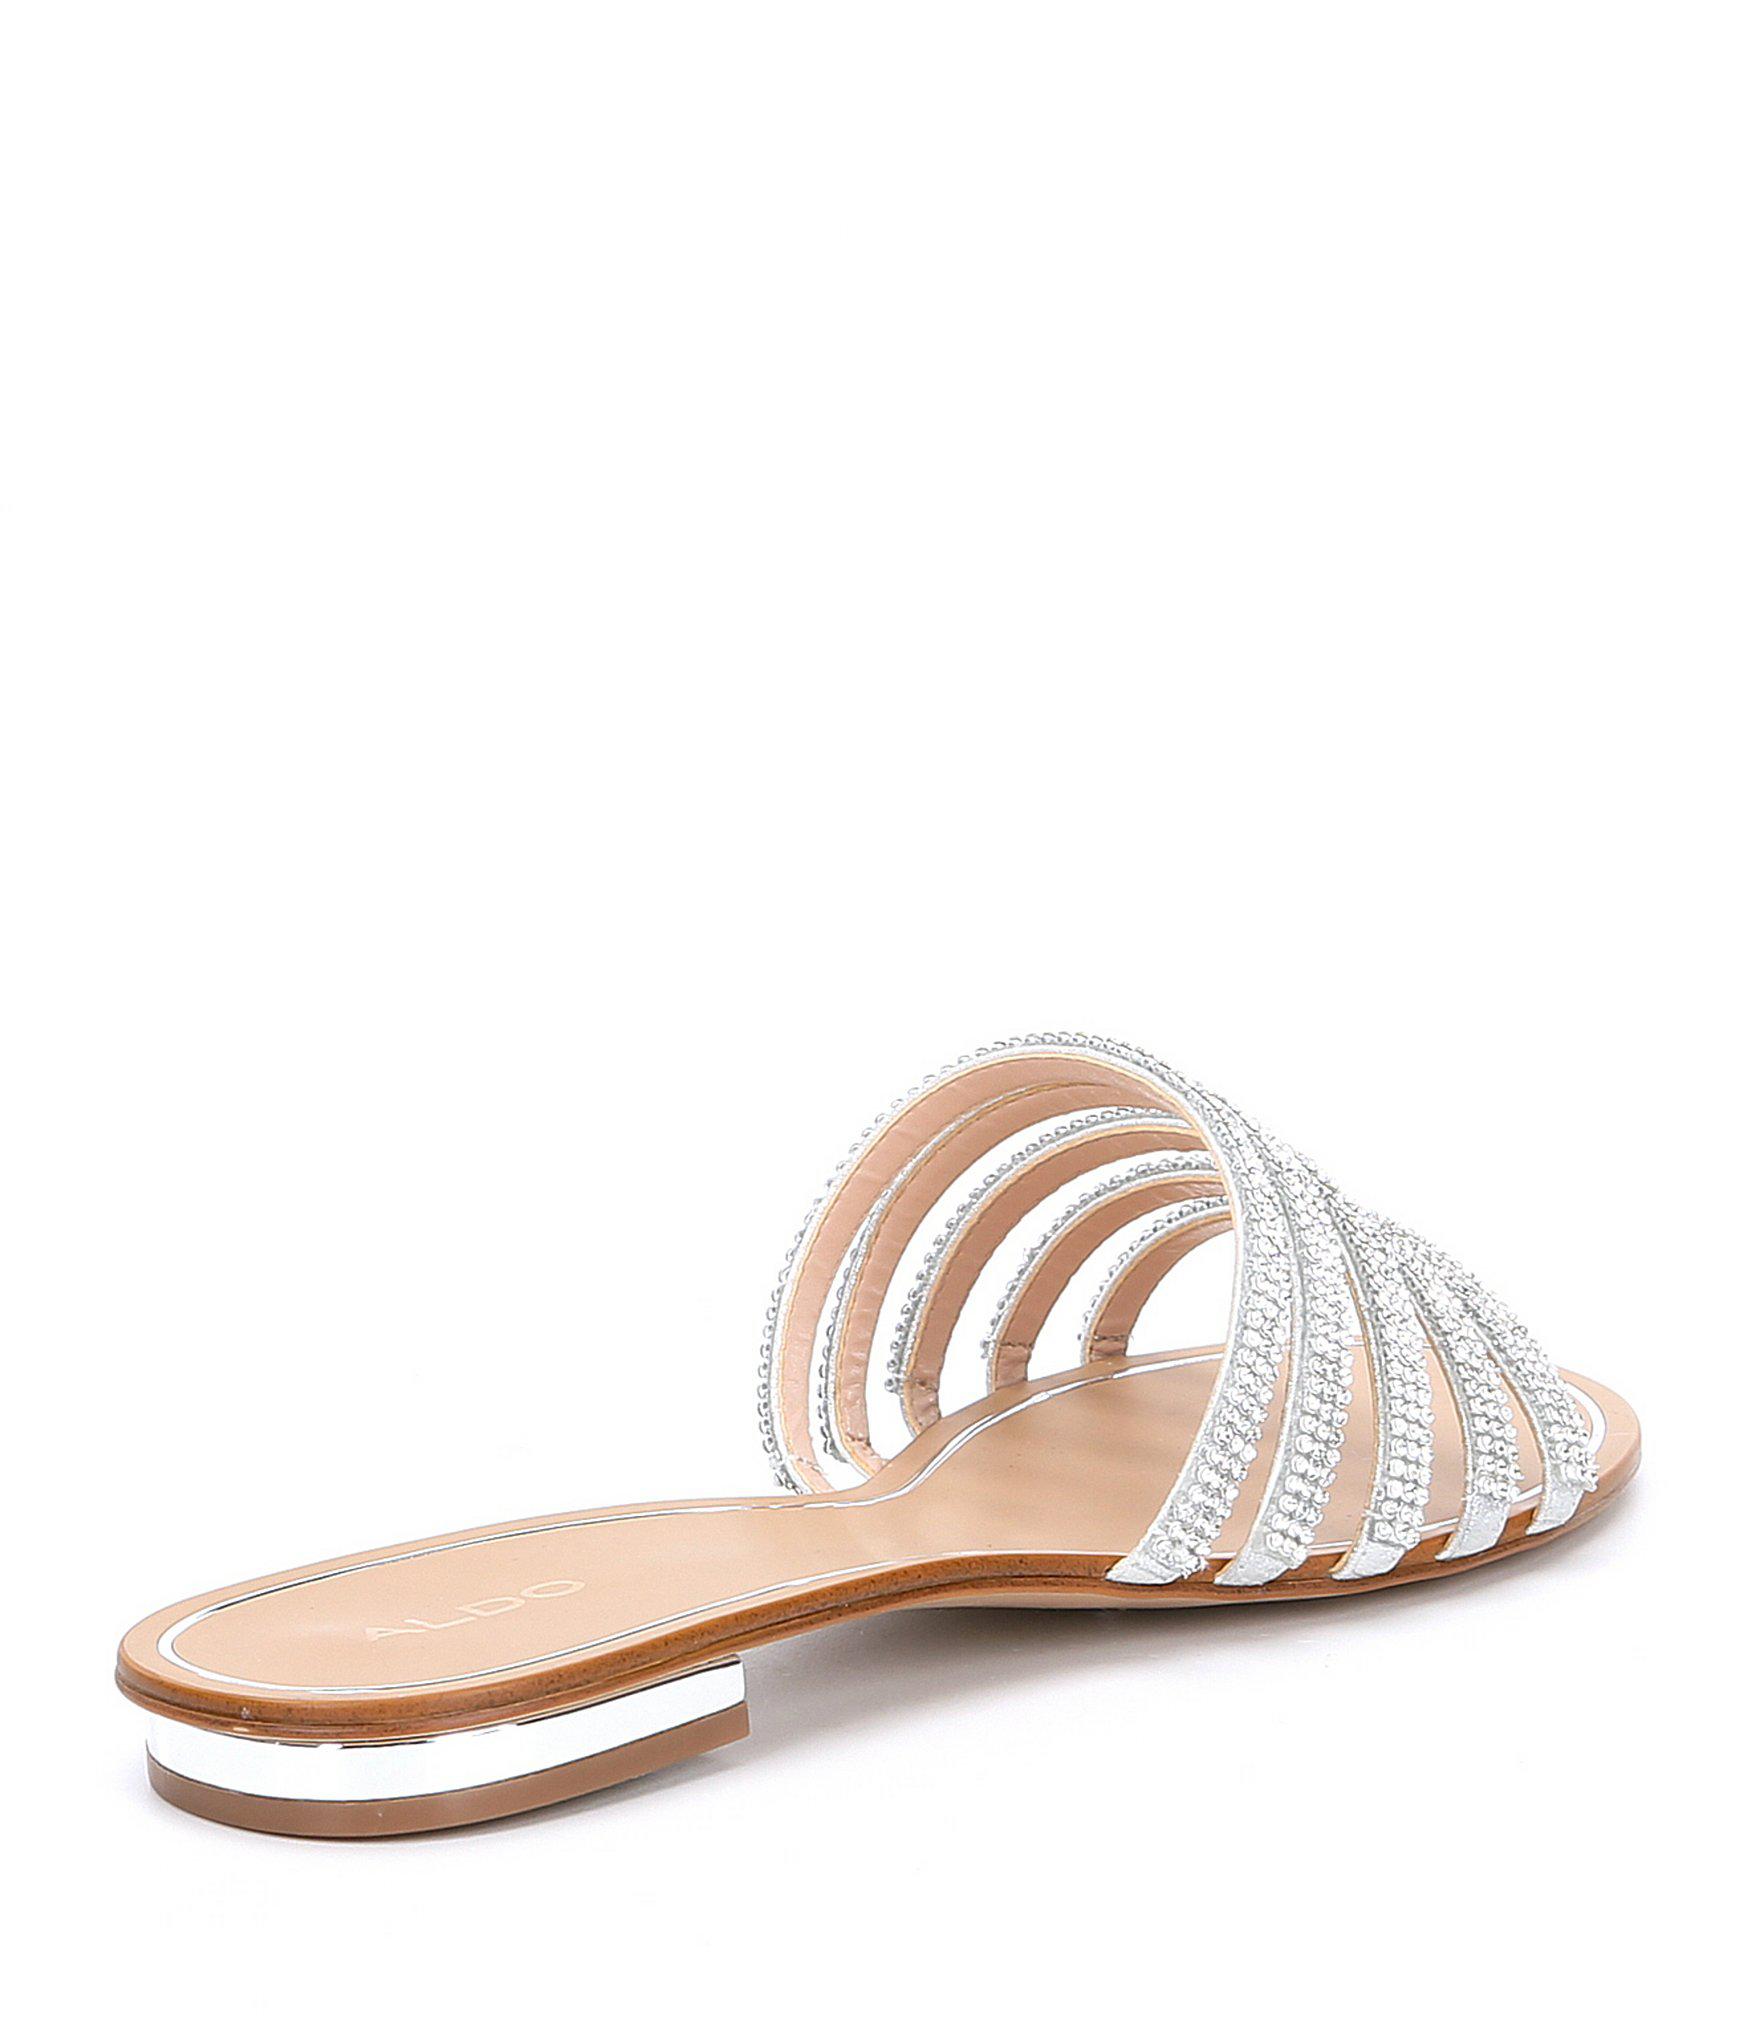 aldo butterfly slides outlet store 1b4a3 ae74c